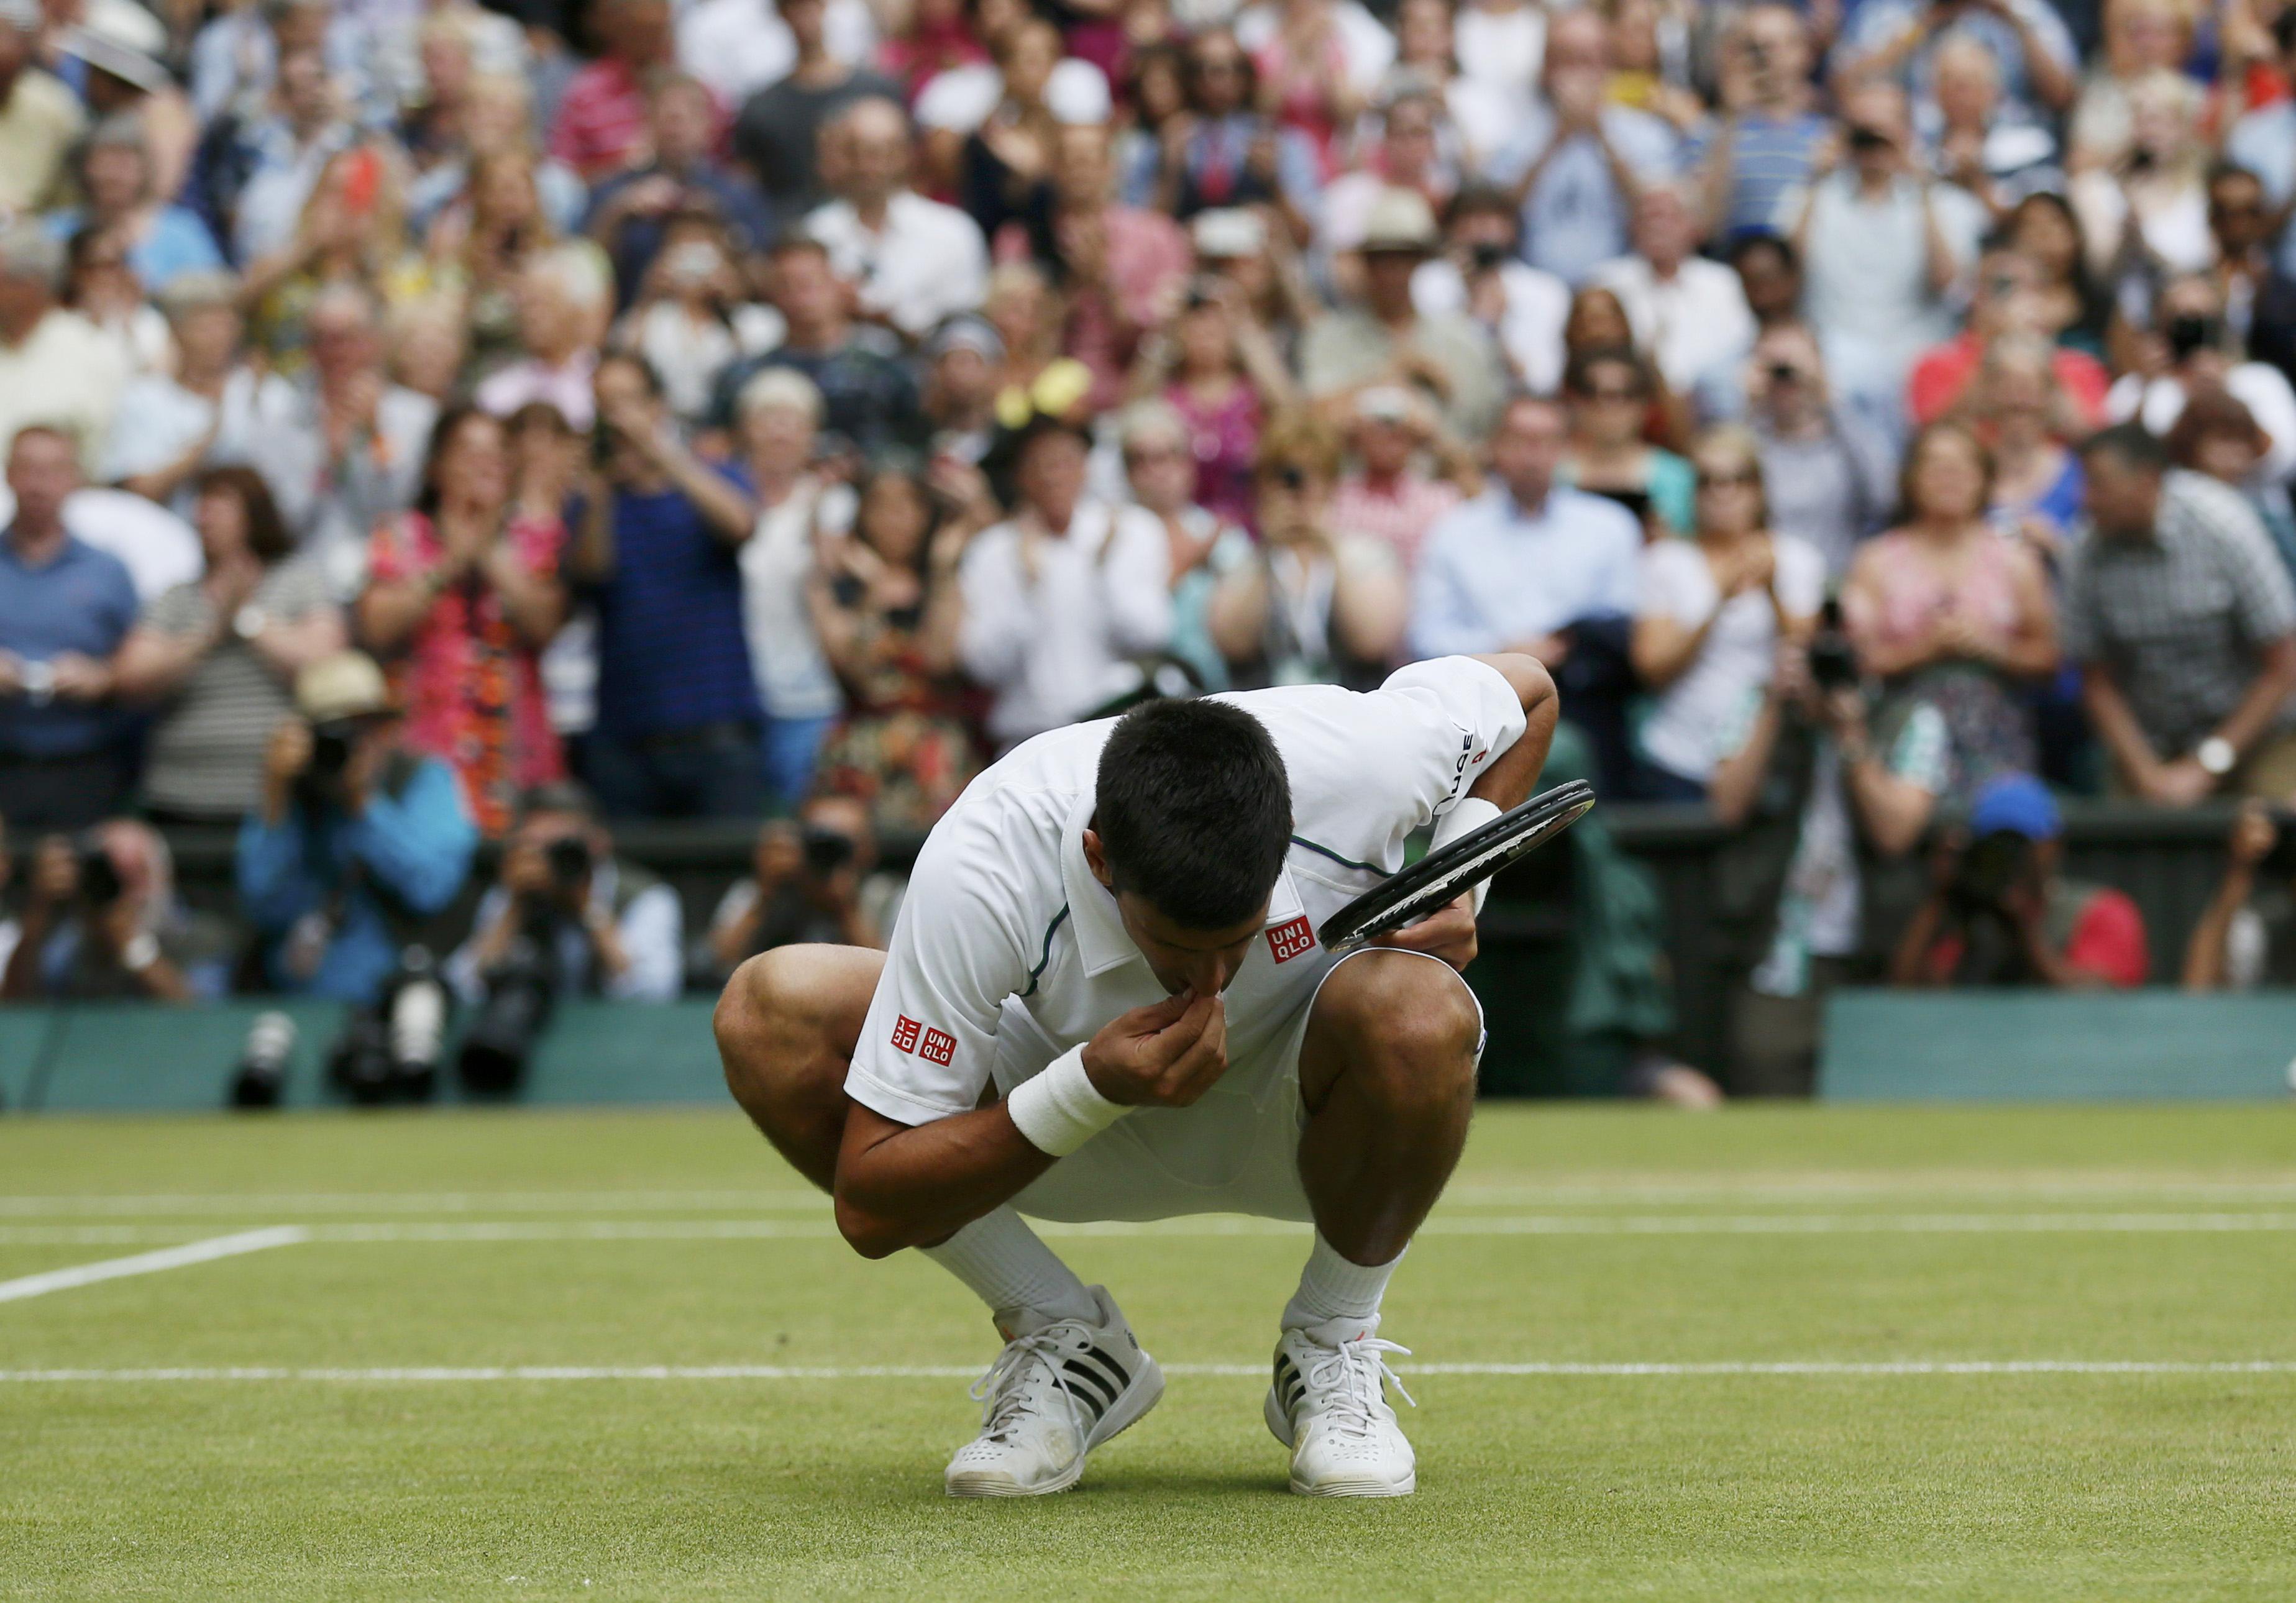 Novak Djokovic of Serbia eats some grass off Centre Court after winning his Men's Singles Final match against Roger Federer of Switzerland at the Wimbledon Tennis Championships in London, July 12, 2015. REUTERS/Stefan Wermuth